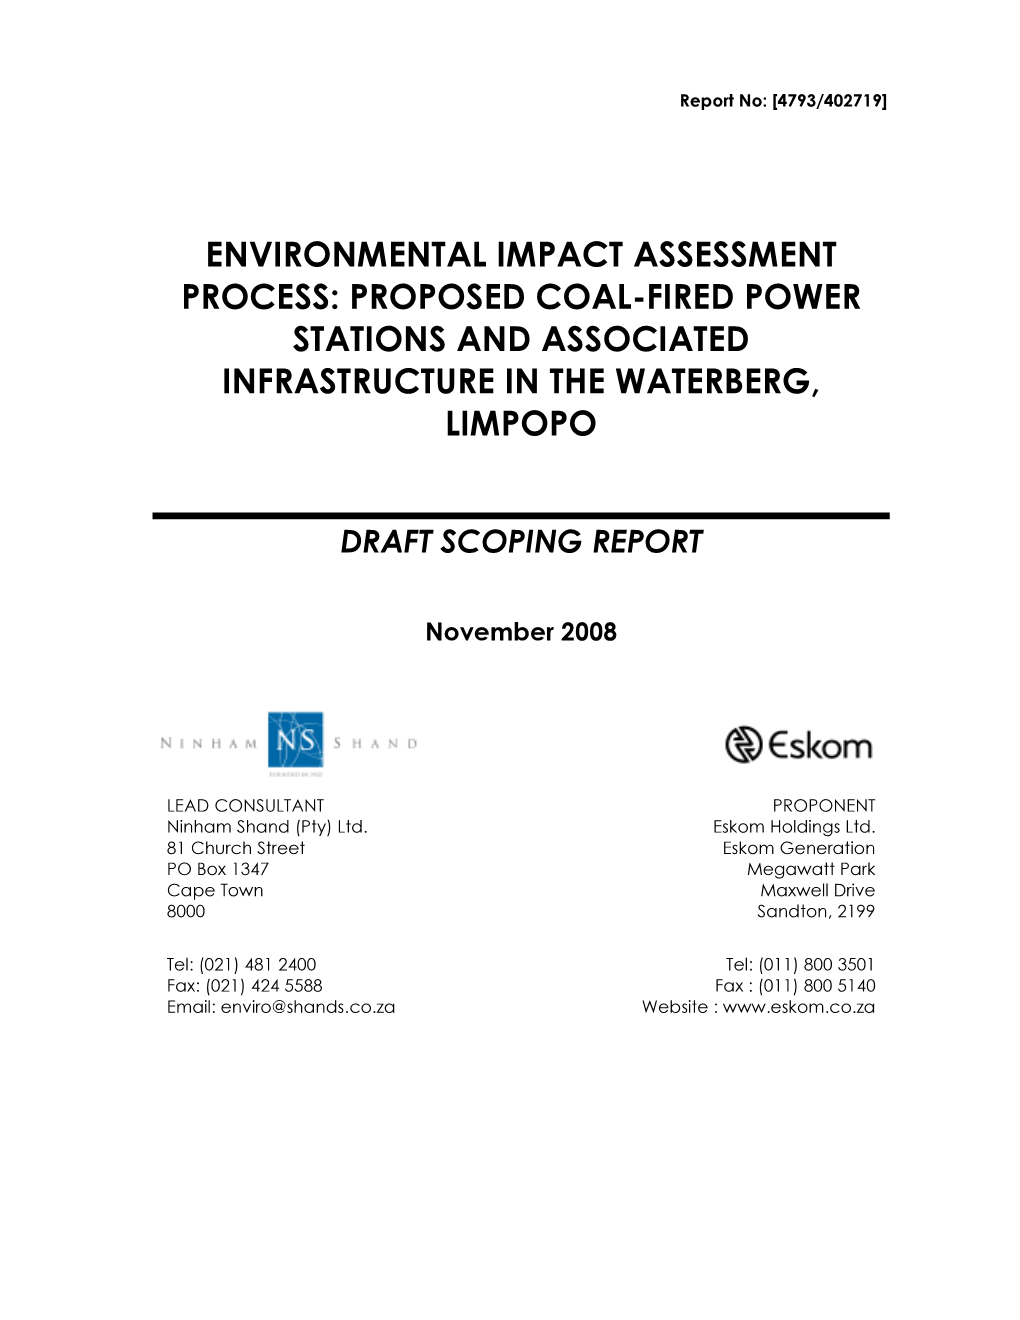 Environmental Impact Assessment Process: Proposed Coal-Fired Power Stations and Associated Infrastructure in the Waterberg, Limpopo